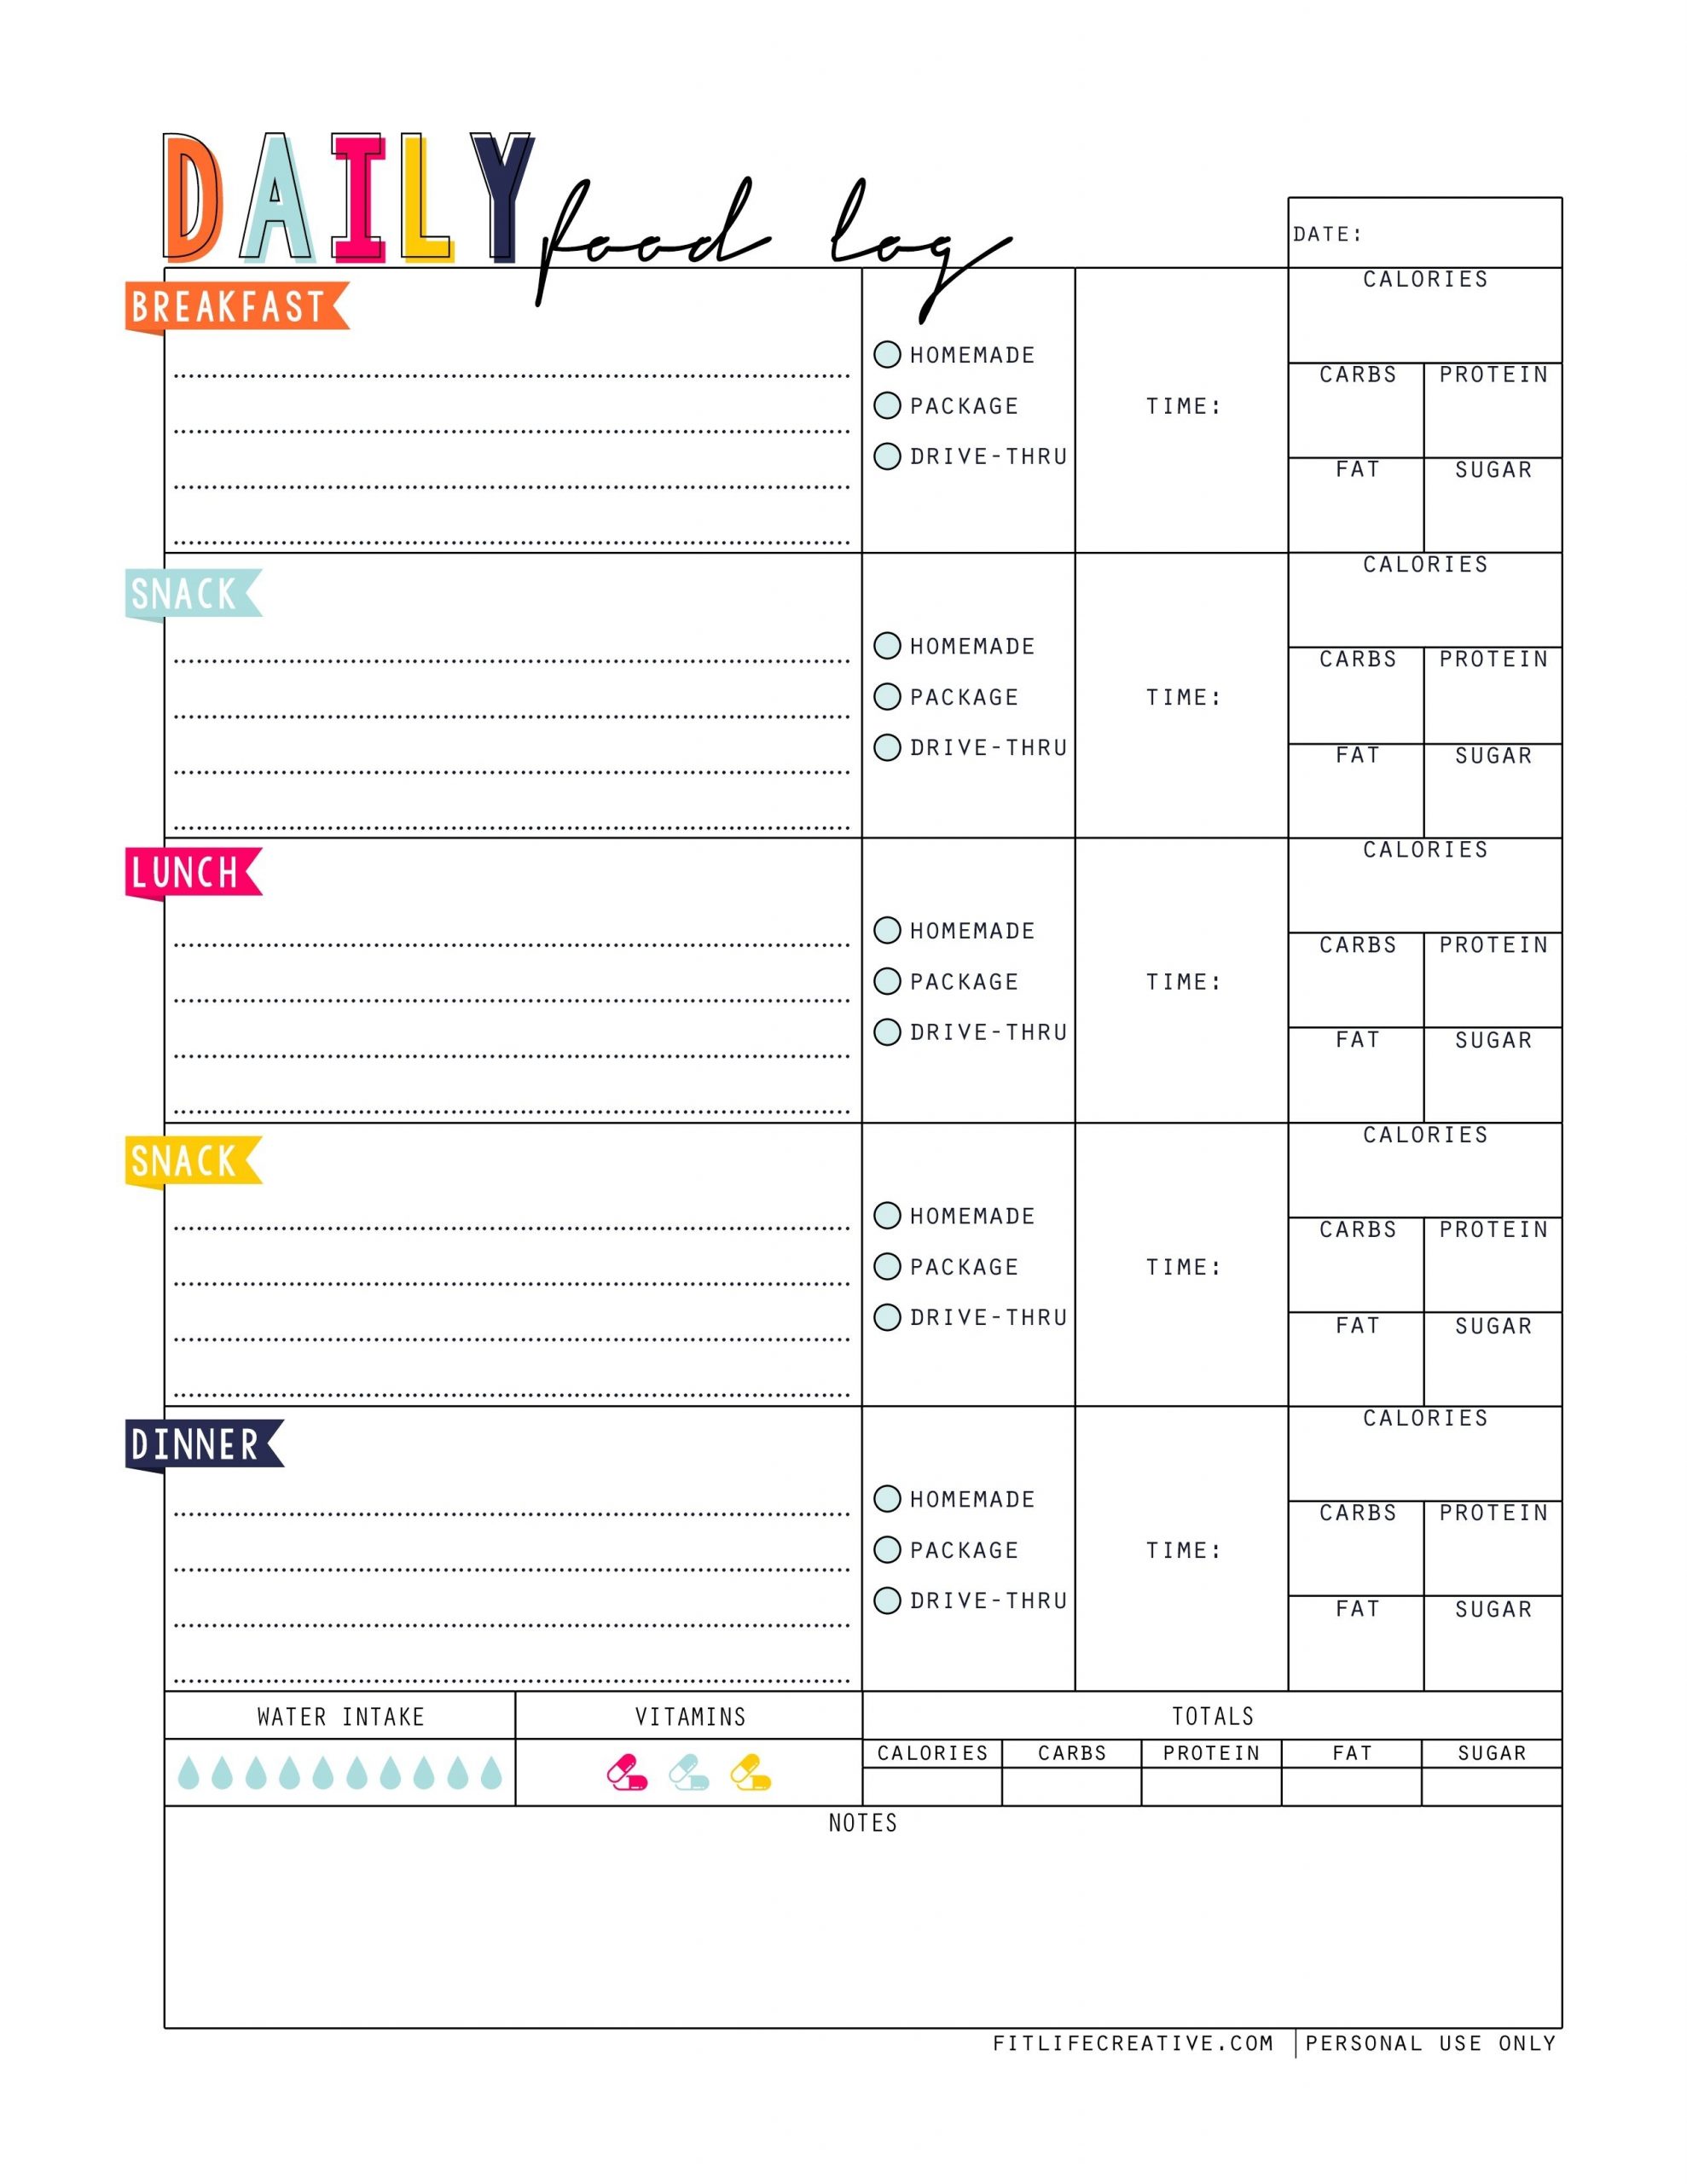 Daily Food Log Printable A Successful Health And Fitness